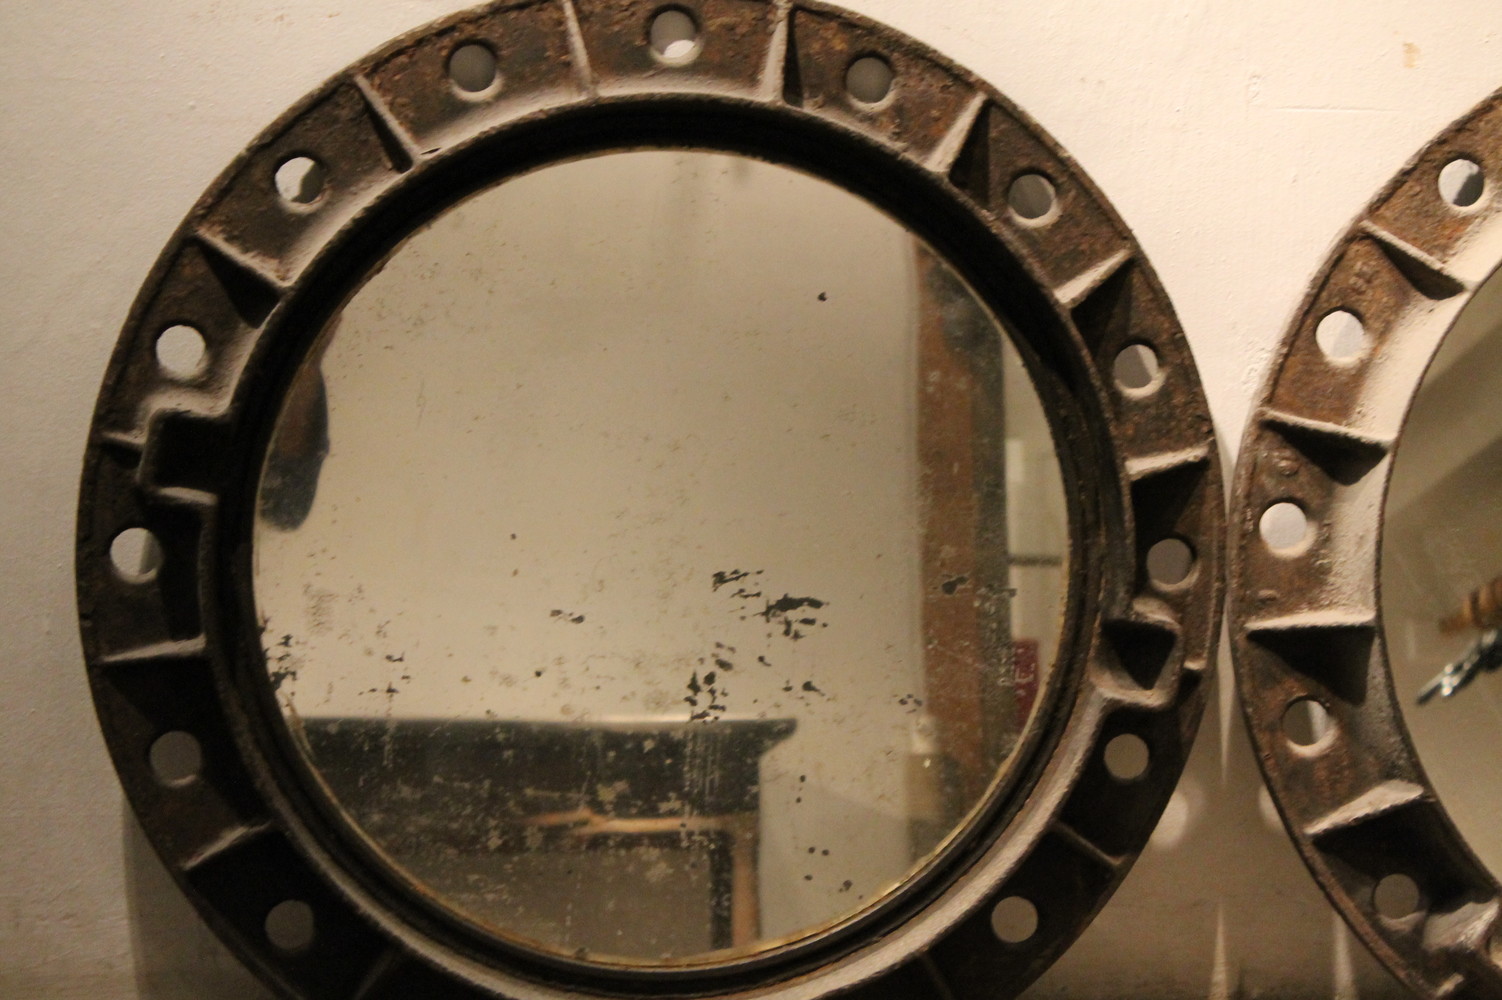 industrial cast iron mirrors (2) rivaled